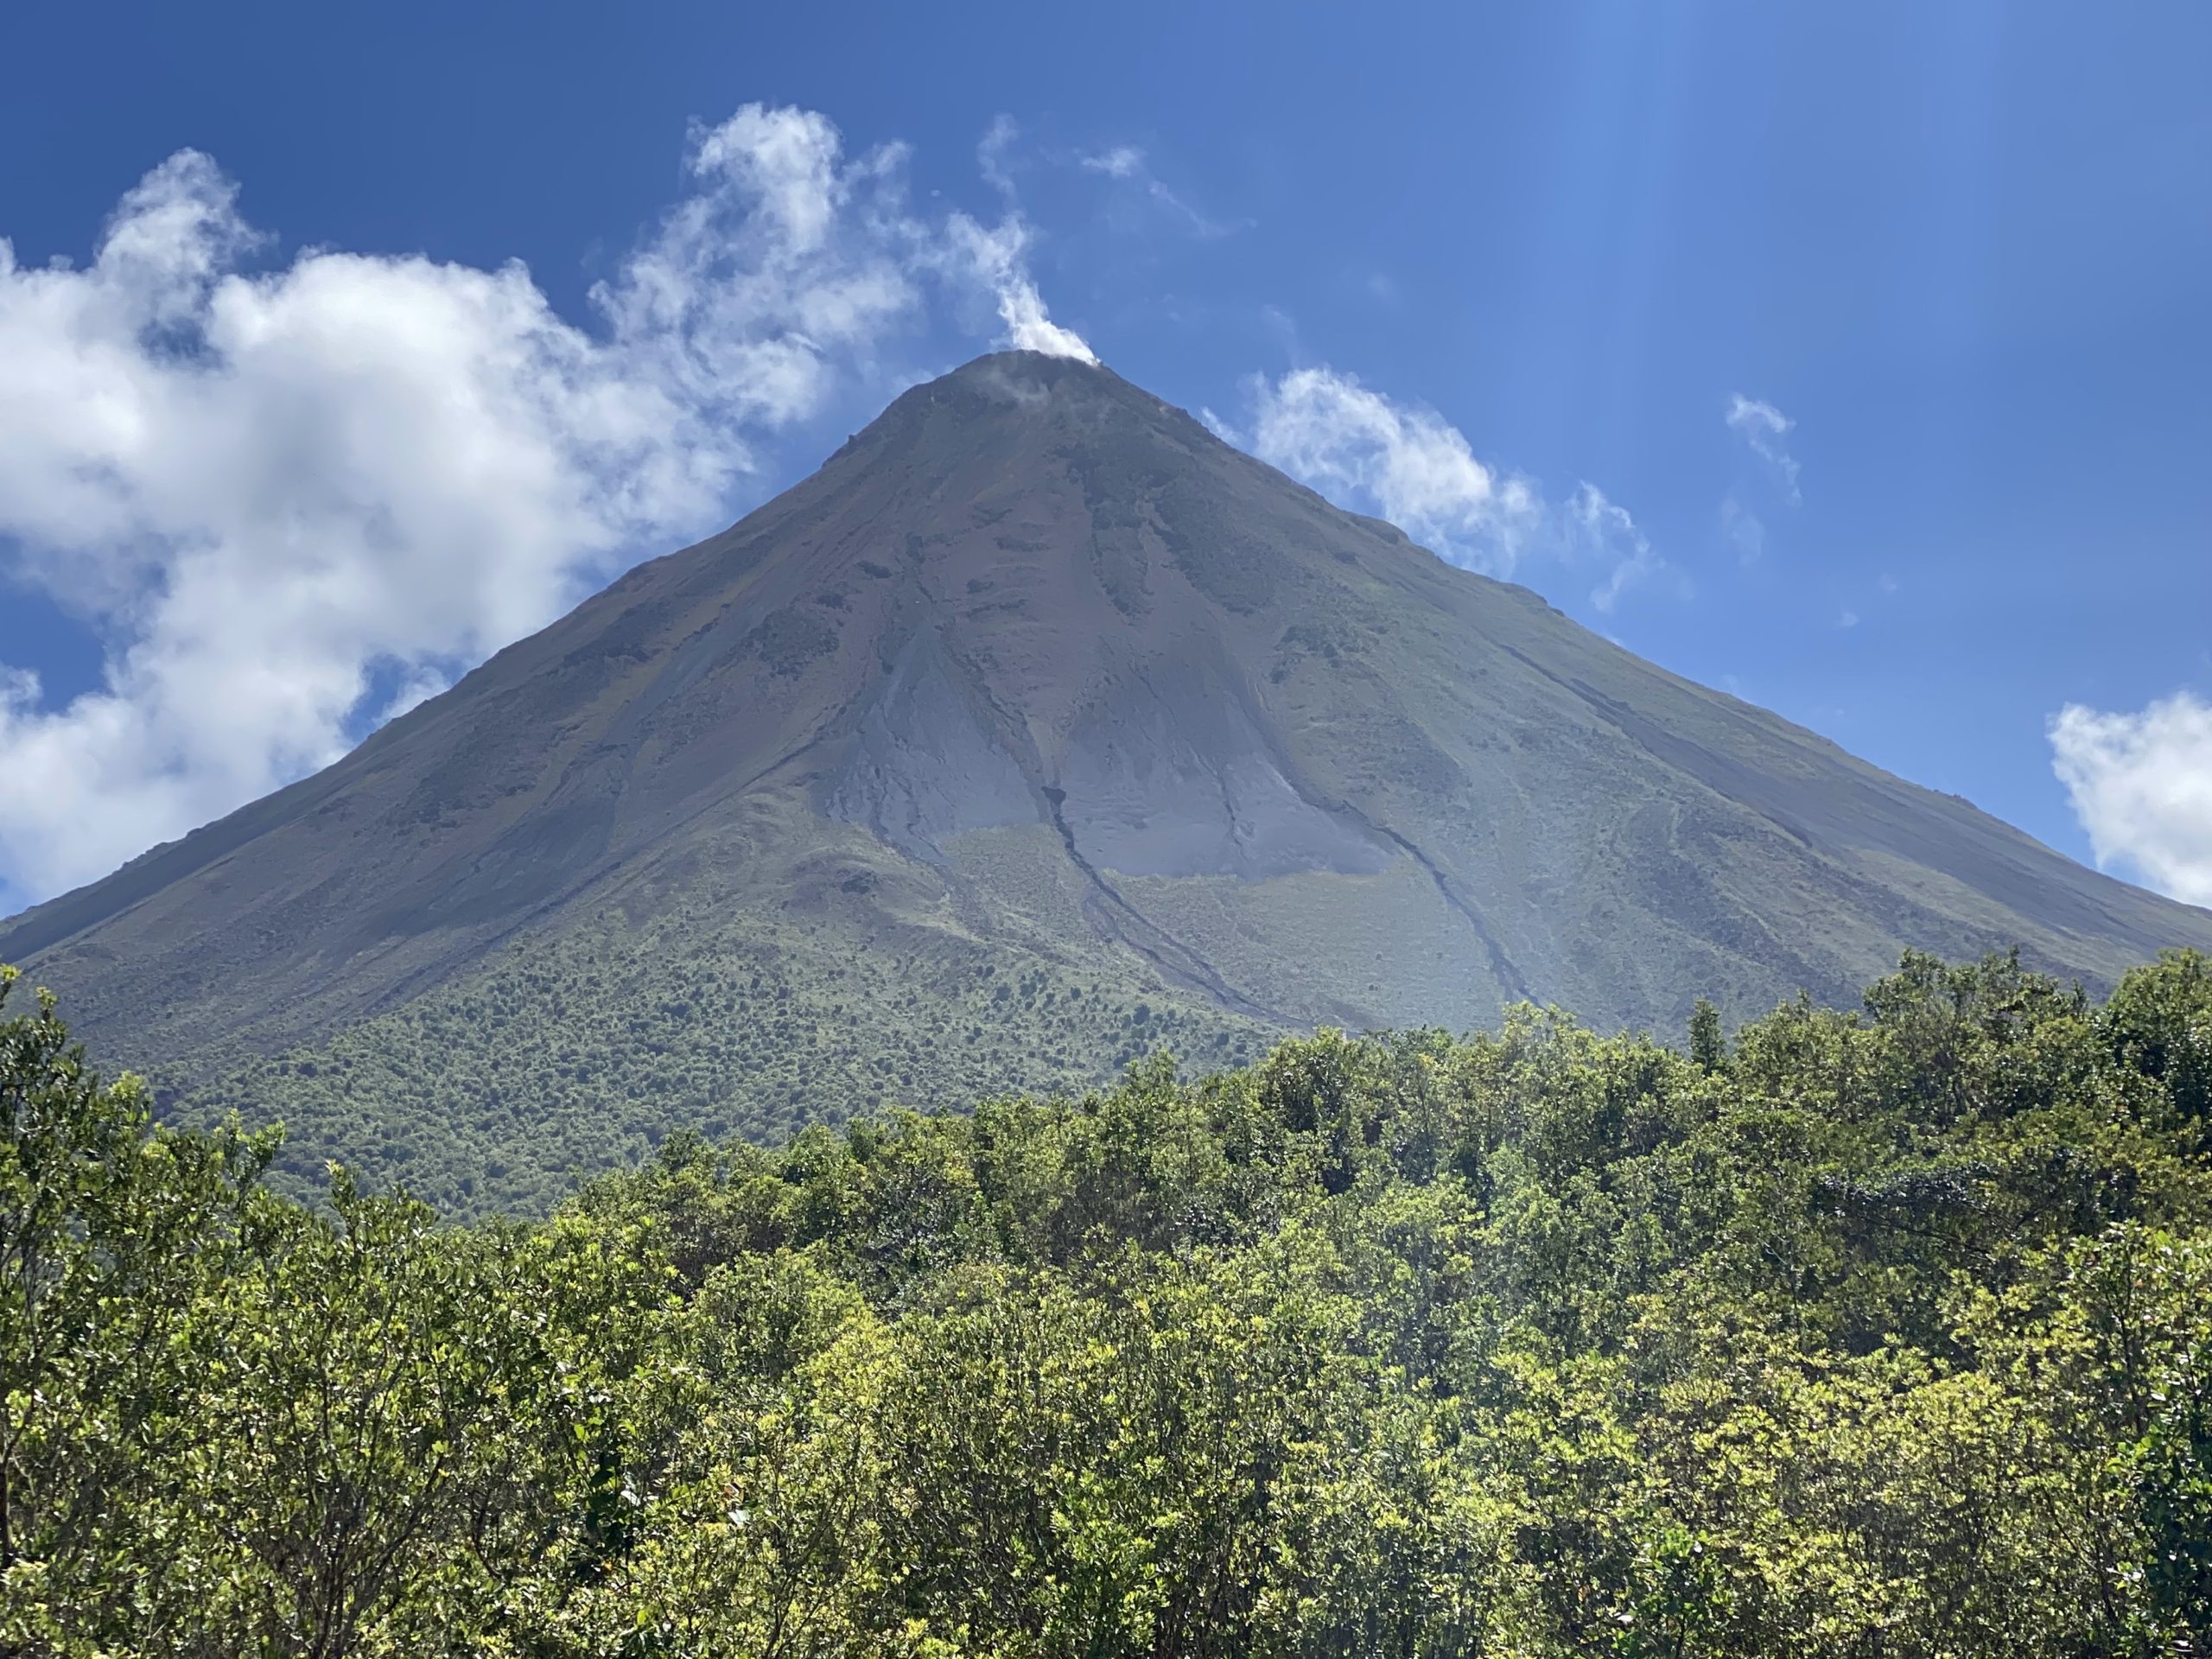 Gate 1 Travel Review: Costa Rica 2022